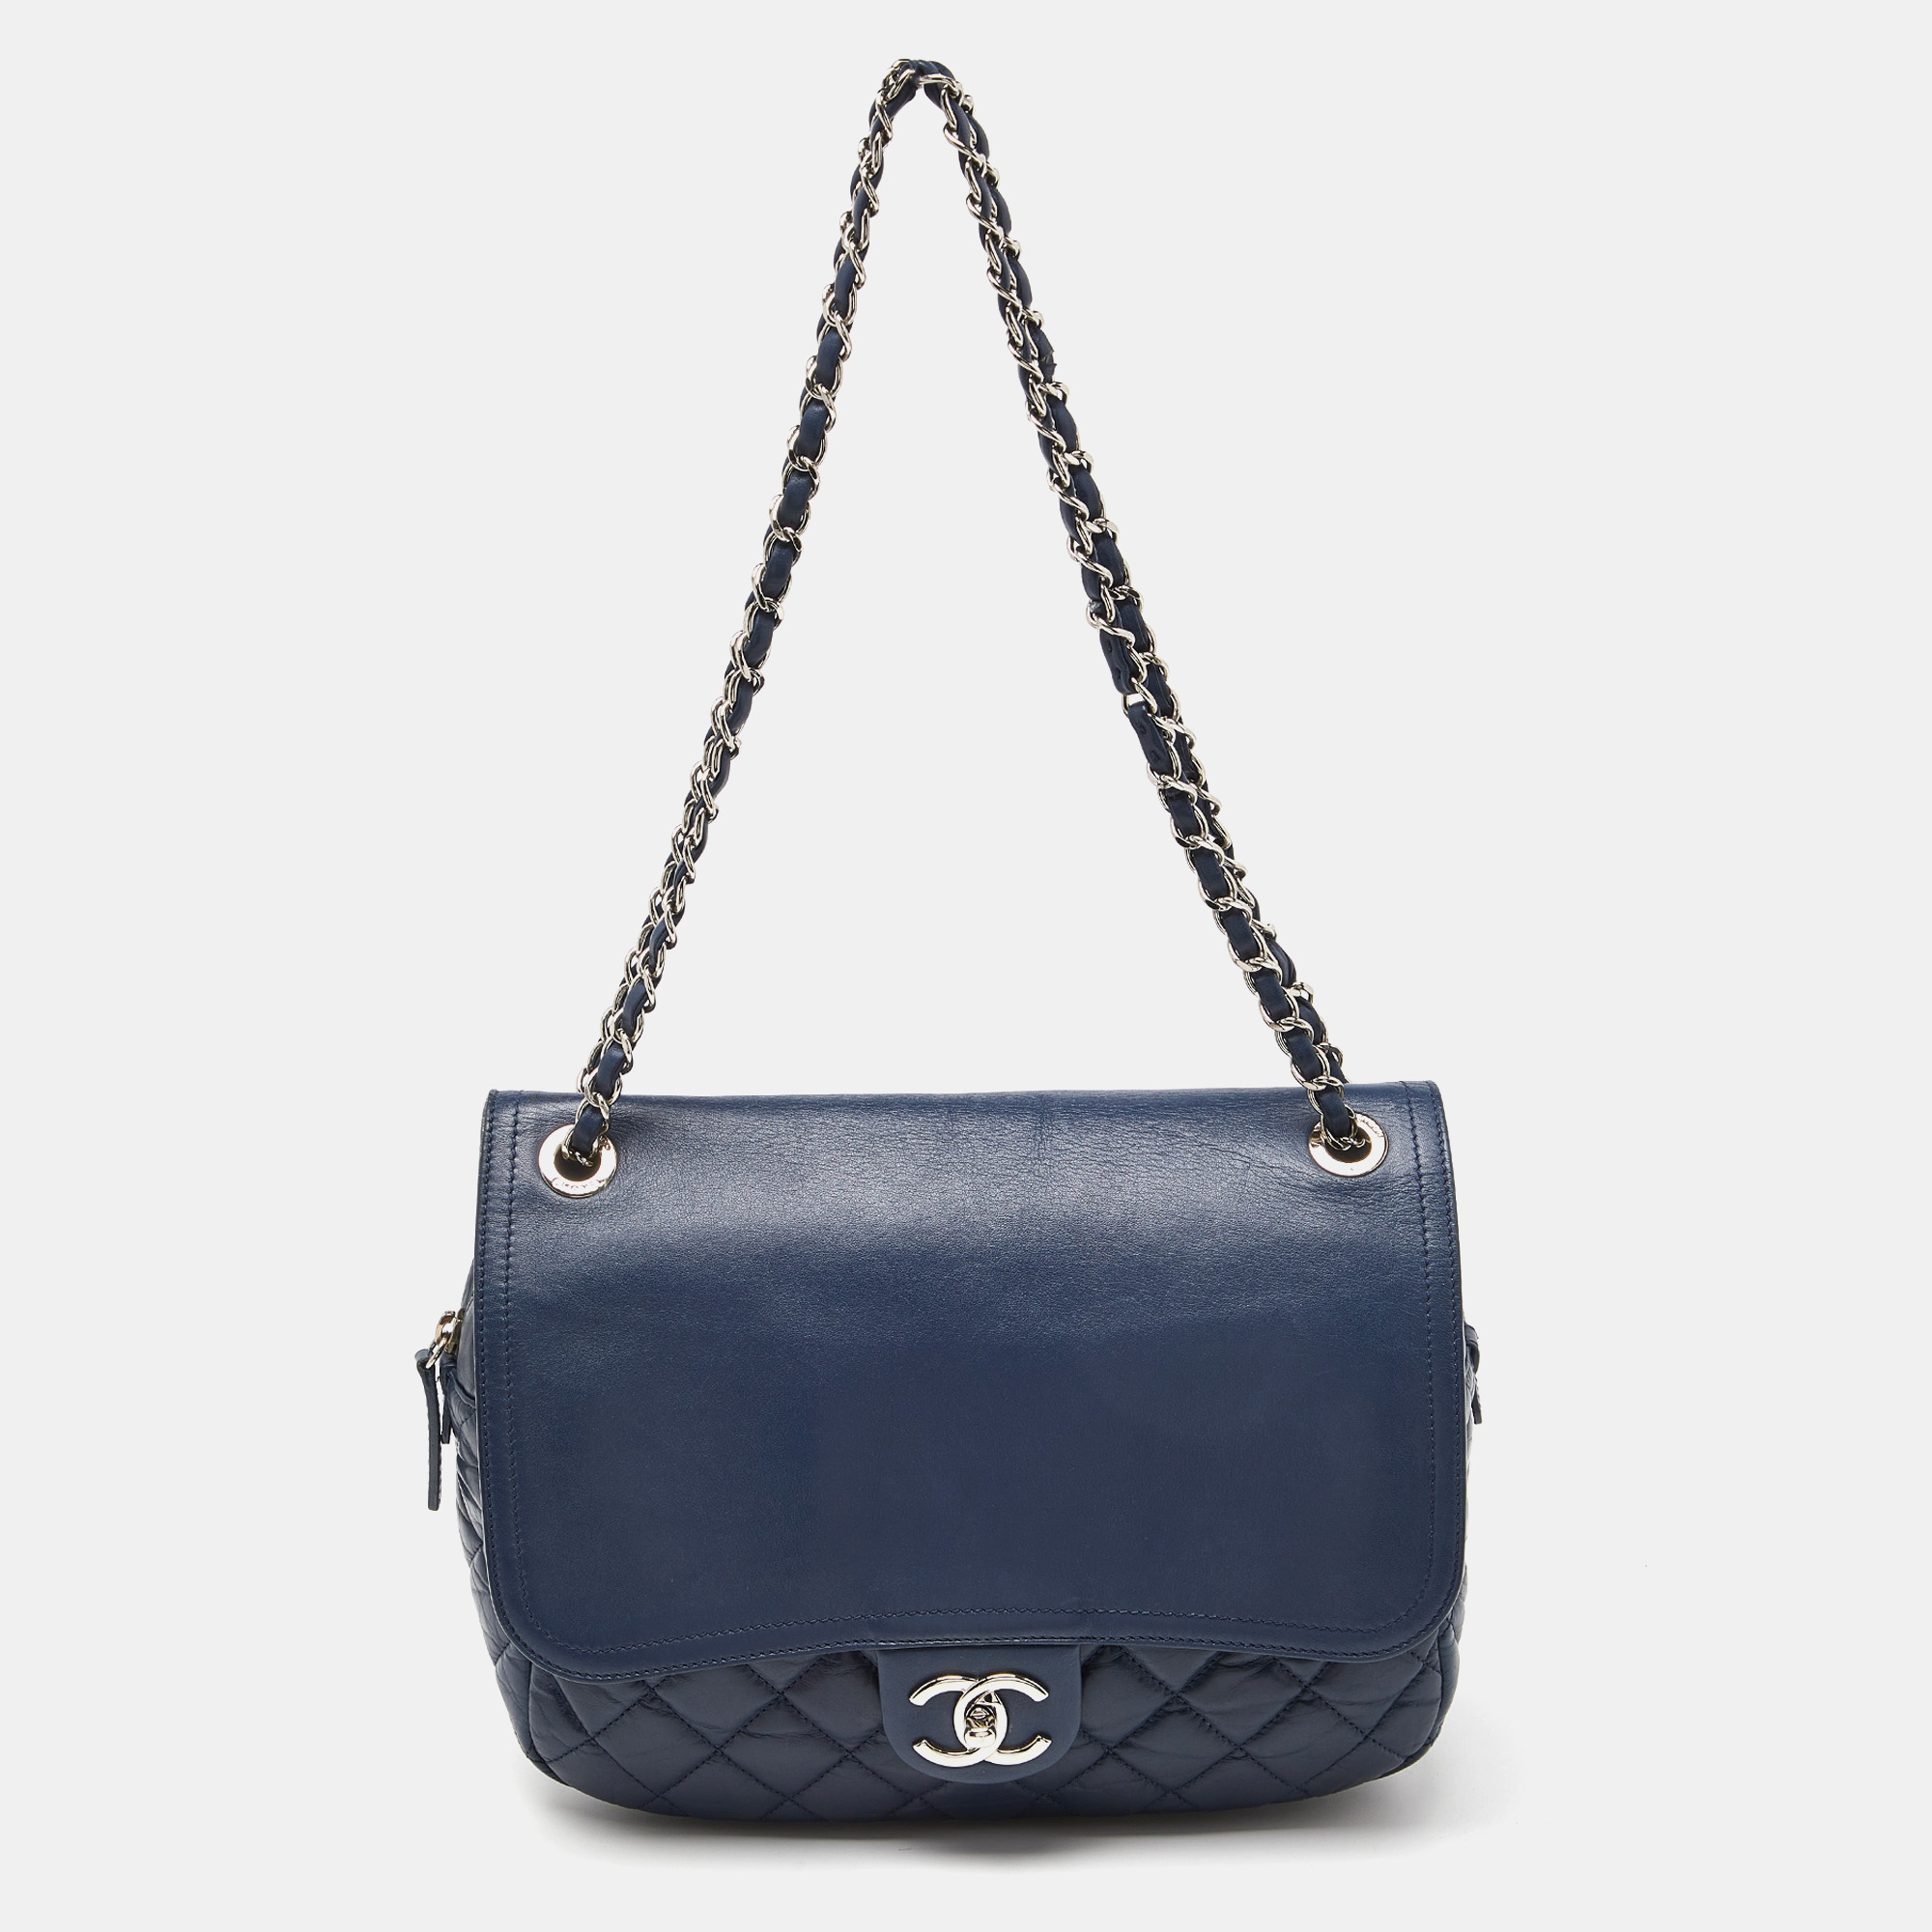 Pre-owned Chanel Blue Quilted Aged Leather Flap Shoulder Bag